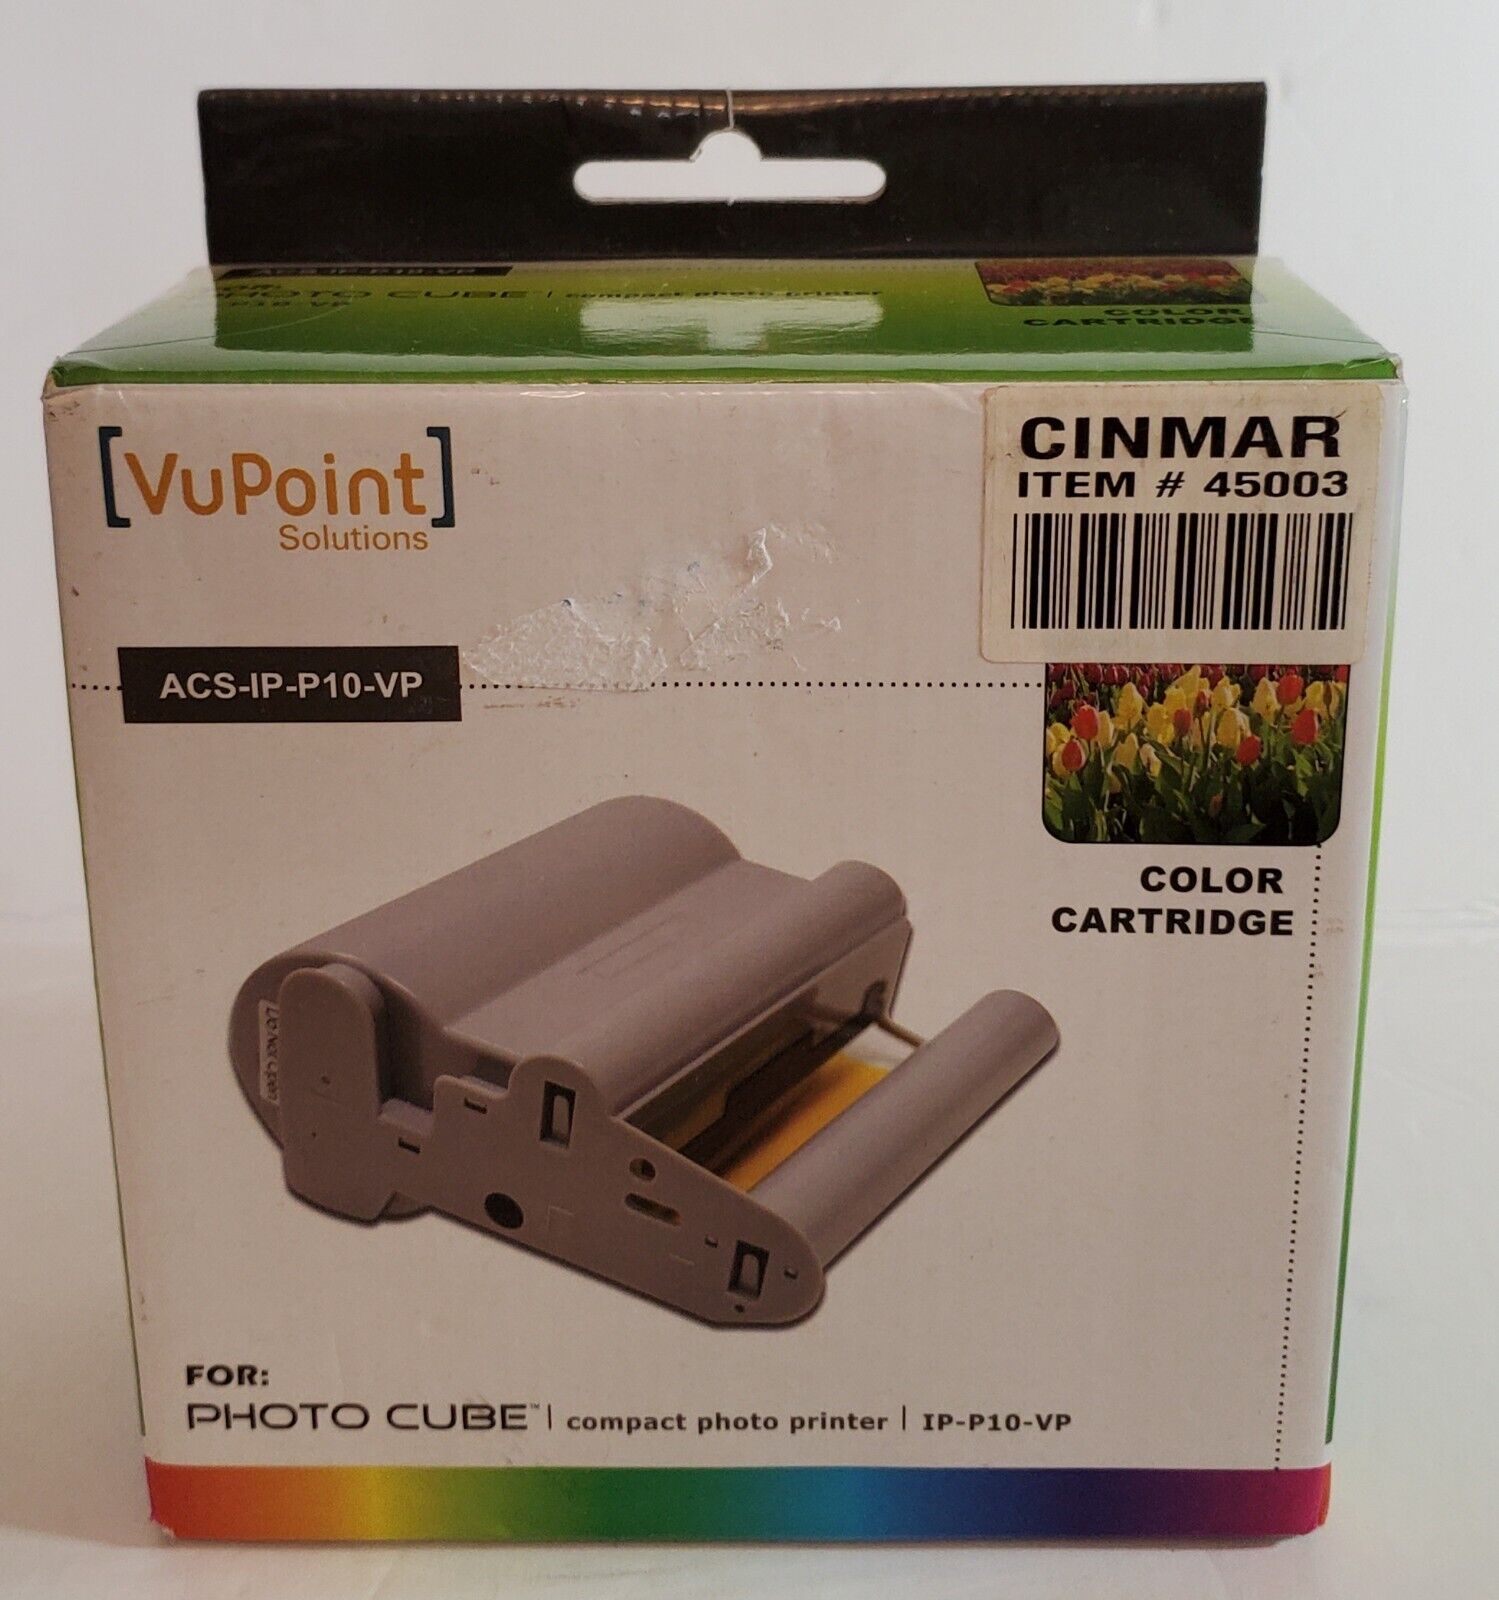 VuPoint Solutions ACS-IP-P10-VP Color Cartridge for Photo Cube NIB NEW